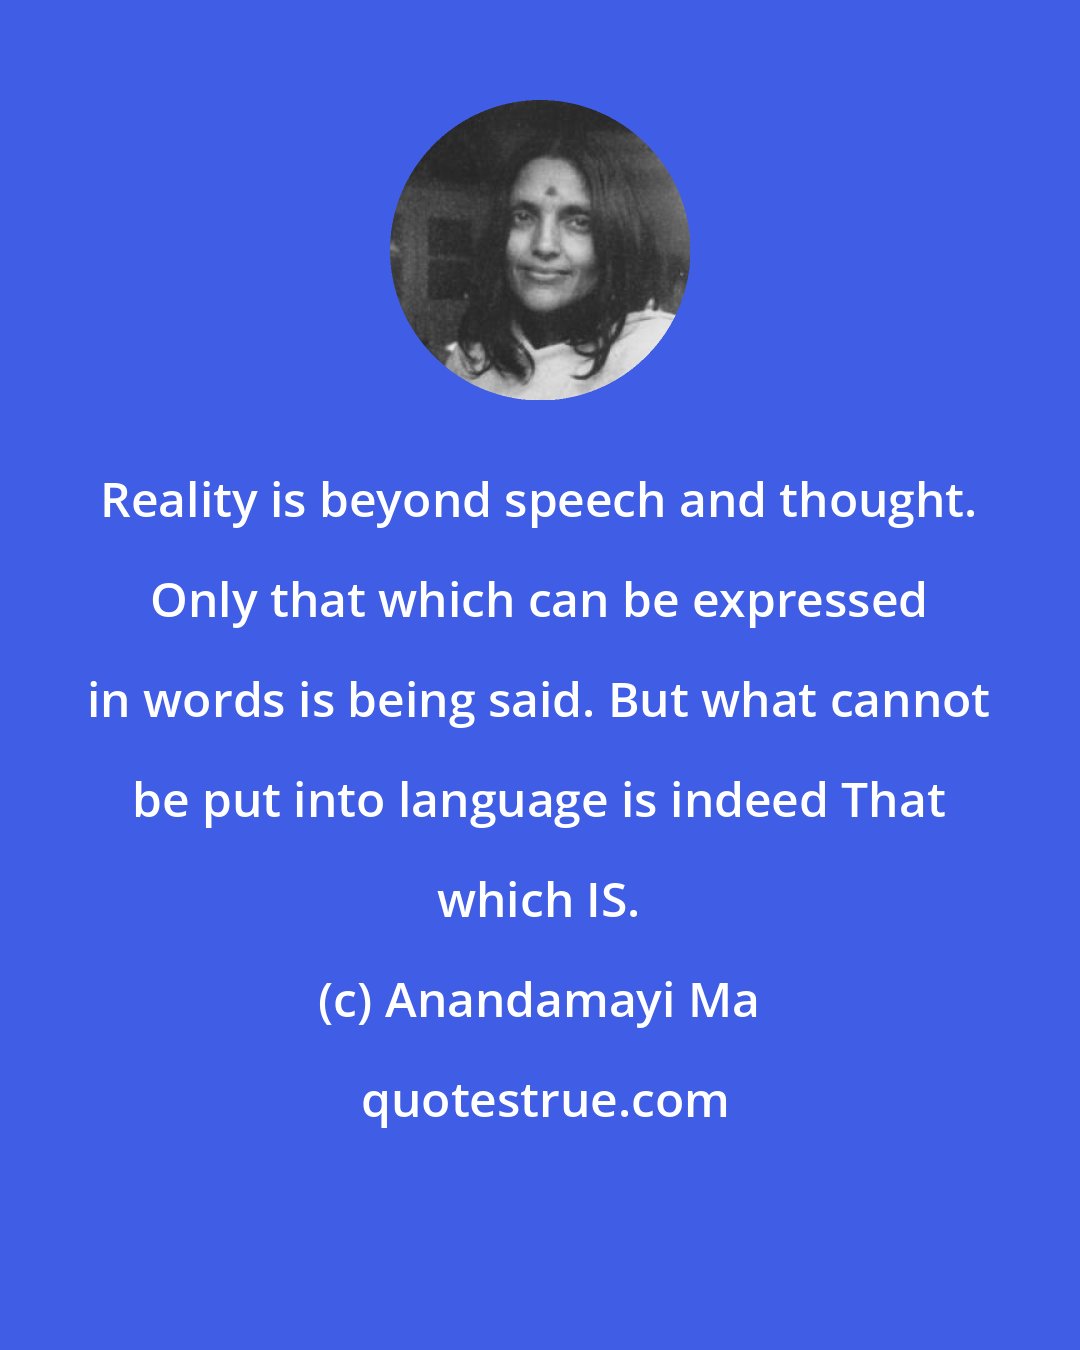 Anandamayi Ma: Reality is beyond speech and thought. Only that which can be expressed in words is being said. But what cannot be put into language is indeed That which IS.